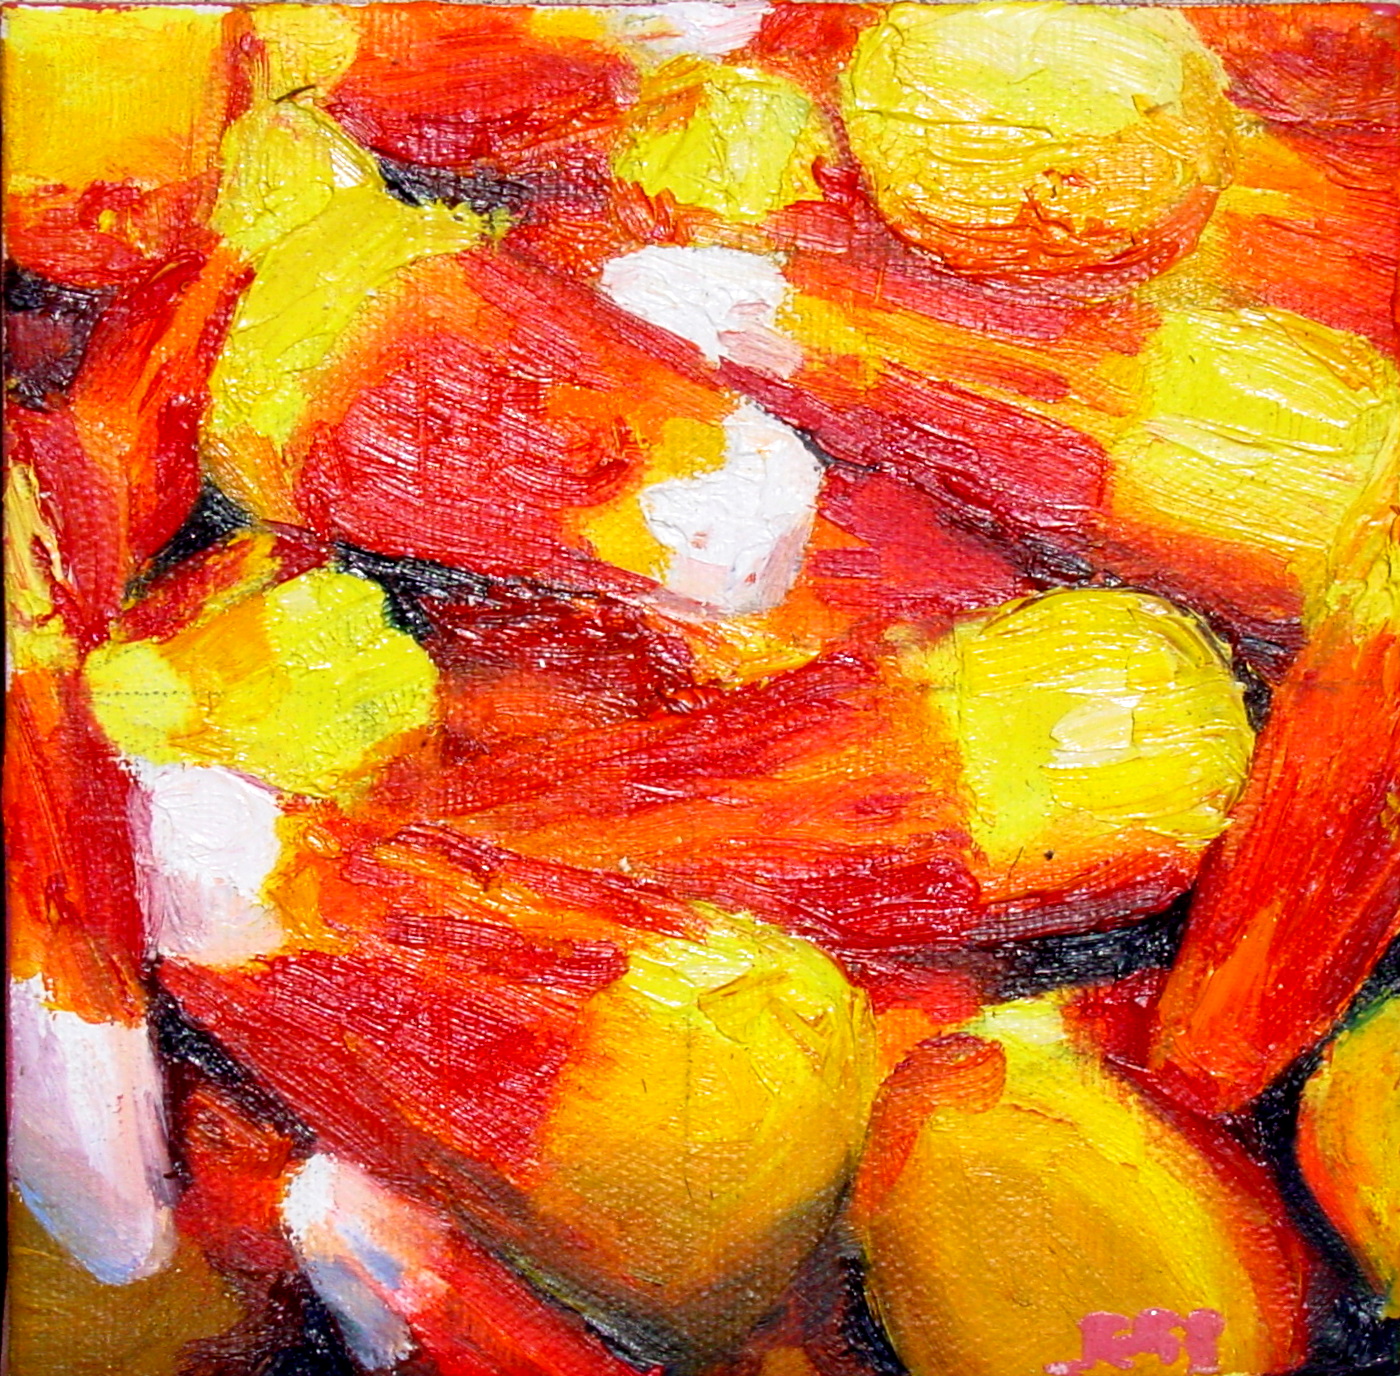 Yum Seven Delicious Oil Paintings 6x6'' Jessica Siemens 2009